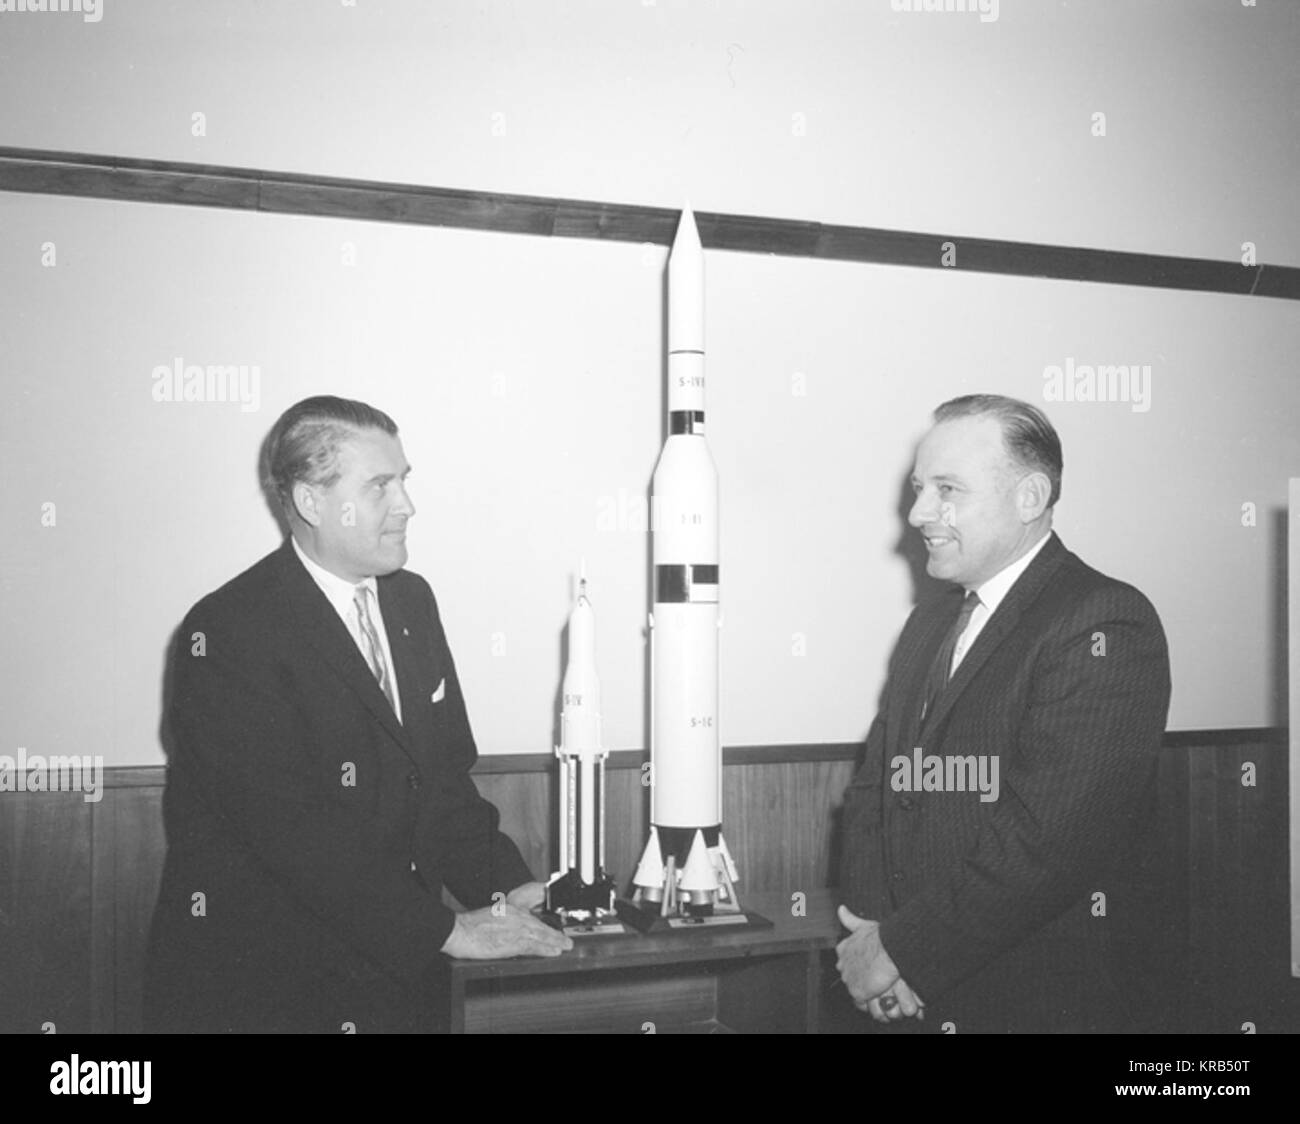 THE MEMBERS OF THE HOUSE COMMITTEE ON SCIENCE AND ASTRONAUTICS VISITED THE MARSHALL SPACE FLIGHT CENTER(MSFC) ON MARCH 9, 1962 TO GATHER FIRSTHAND INFORMATION OF THE NATION'S SPACE EXPLORATION PROGRAM.  THE CONGRESSIONAL GROUP WAS COMPOSED OF MEMBERS OF THE SUBCOMMITTEE ON MANNED SPACE FLIGHT.  THE SUBCOMITTEE WAS BRIEFED ON MSFC'S MANNED SPACE EFFORTS EARLIER IN THE DAY AND THEN INSPECTED MOCKUPS OF THE SATURN I WORKSHOP AND THE APOLLO TELESCOPE MOUNT, TW PROJECTS DEVELOPED BY MSFC FOR THE POST-APOLLO PROGRAM.  IN THIS PHOTOGRAPH, MSFC DIRECTOR, DR WERNHER VON BRAUN AND JO WAGONER, DEMOCRATIC Stock Photo